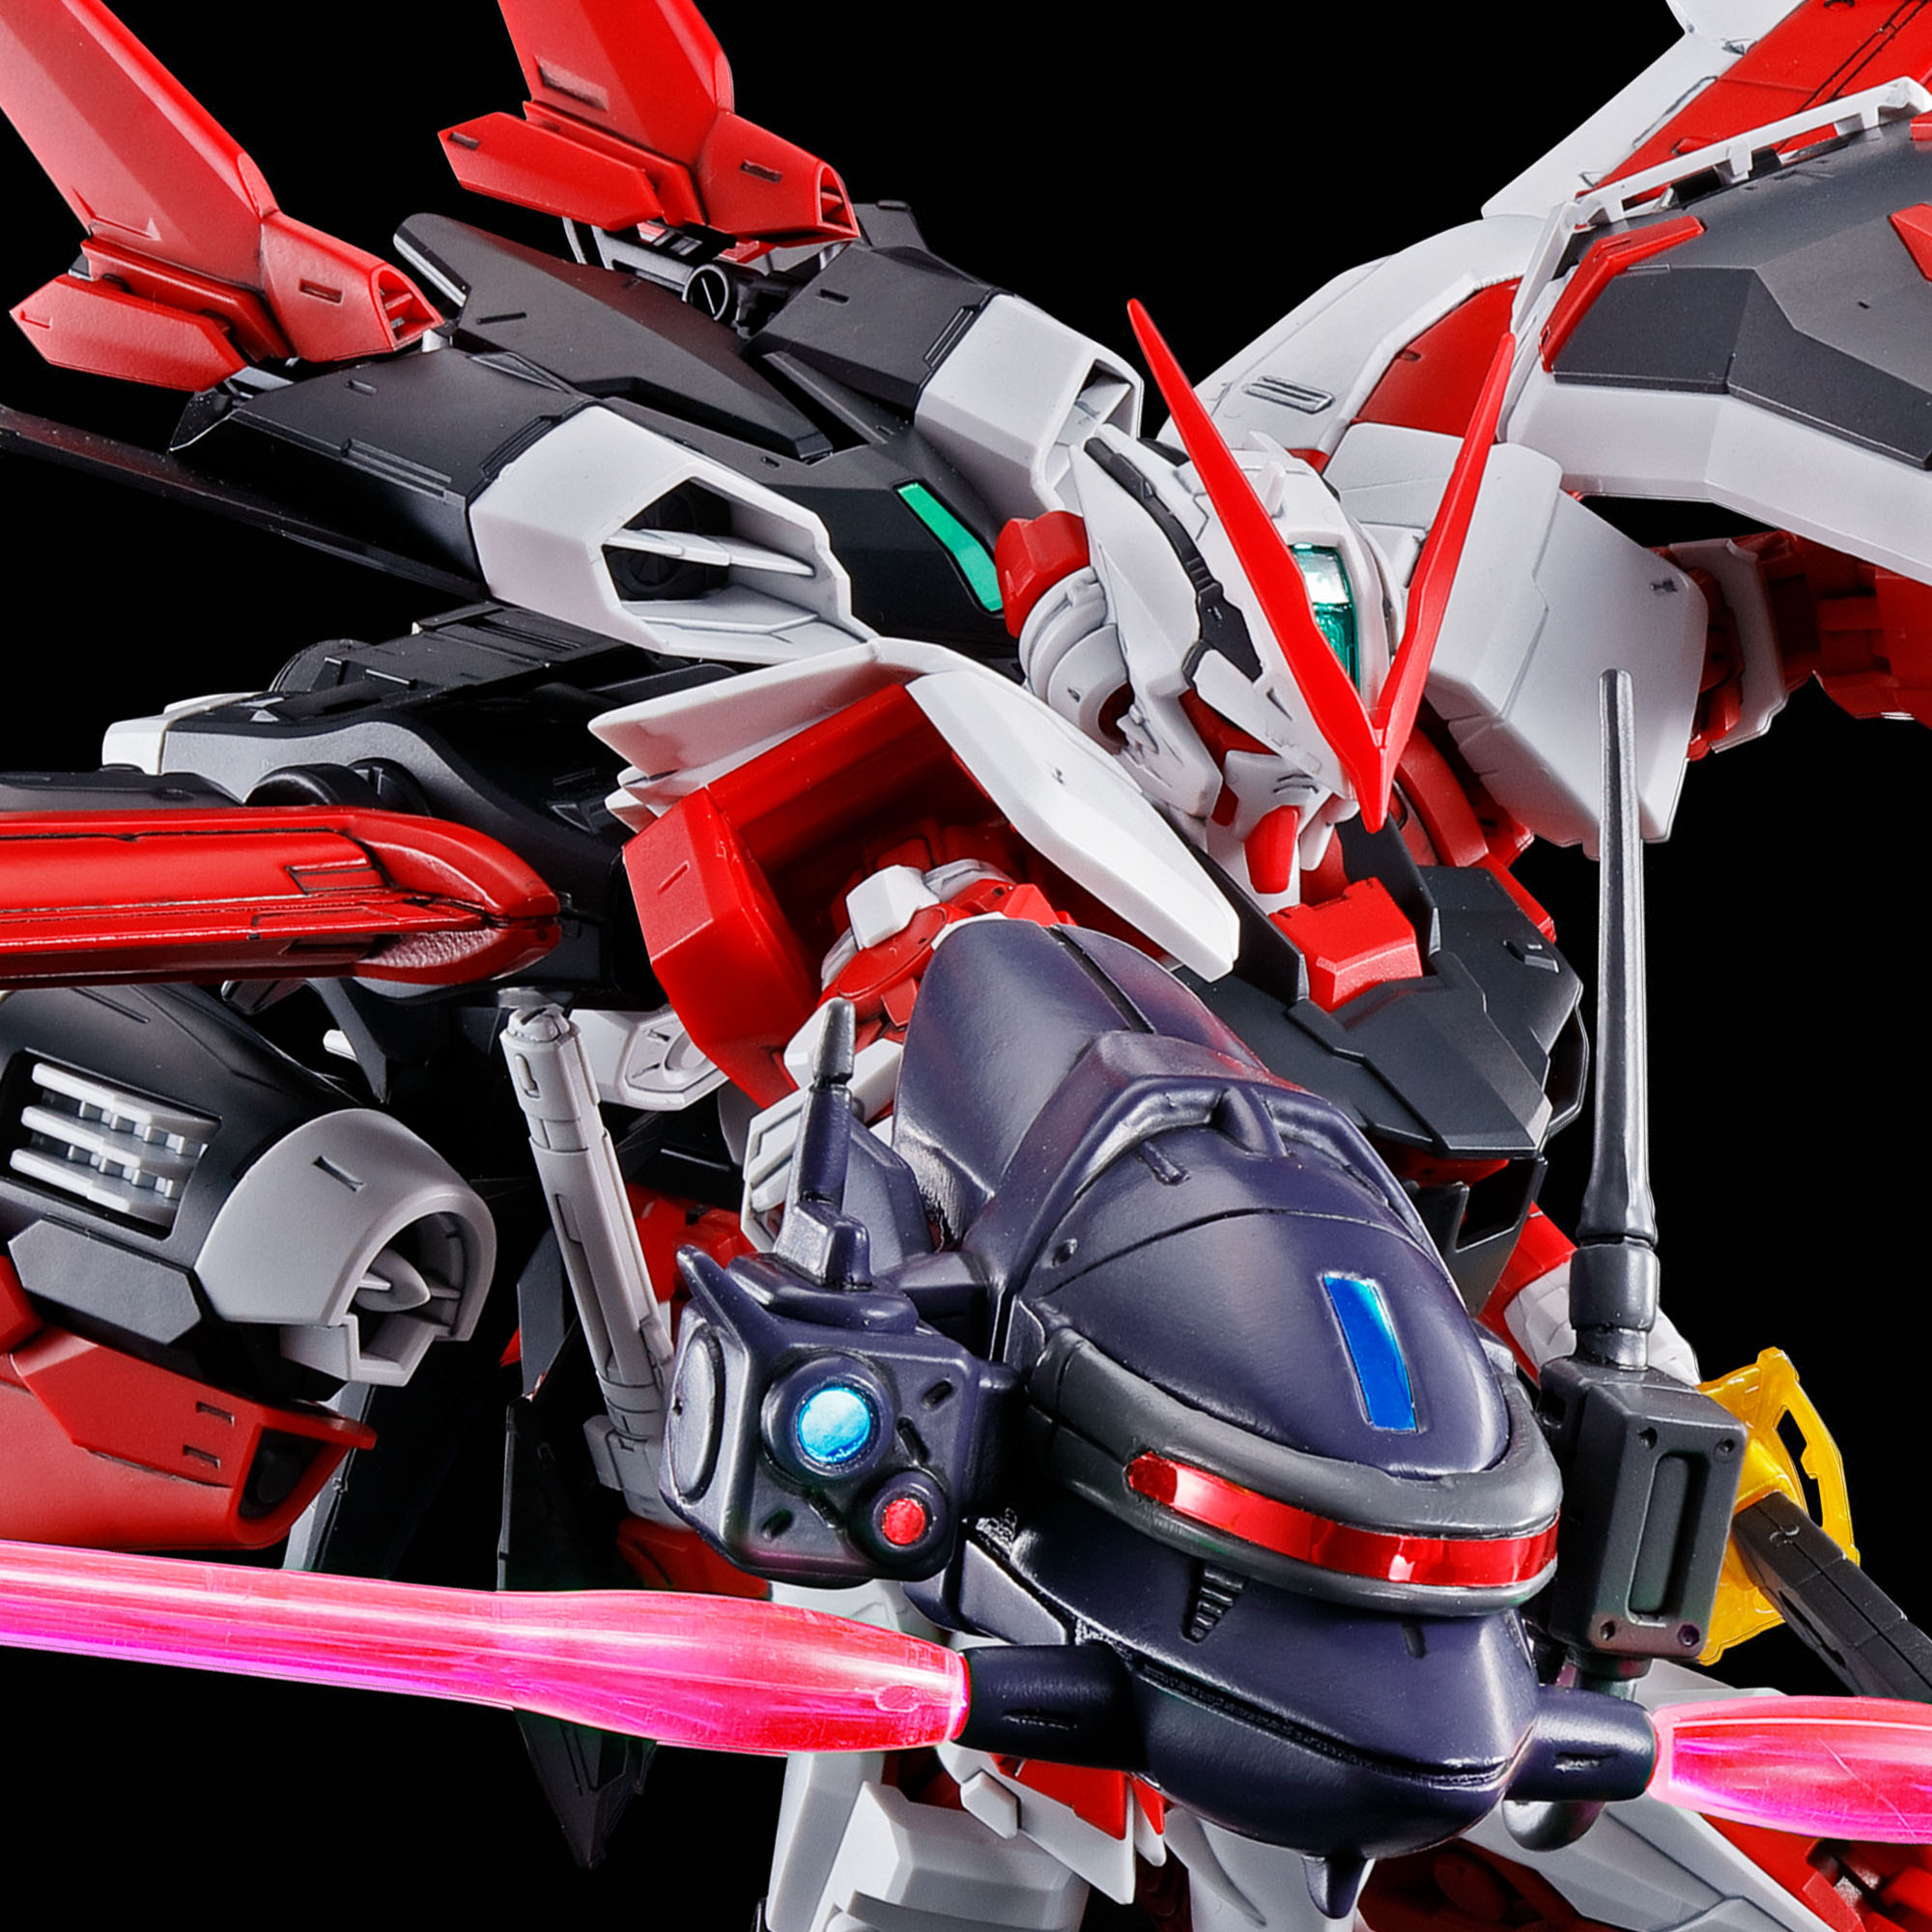 tolv Andrew Halliday snap MG 1/100 GUNDAM ASTRAY RED FRAME FLIGHT UNIT | GUNDAM | PREMIUM BANDAI USA  Online Store for Action Figures, Model Kits, Toys and more